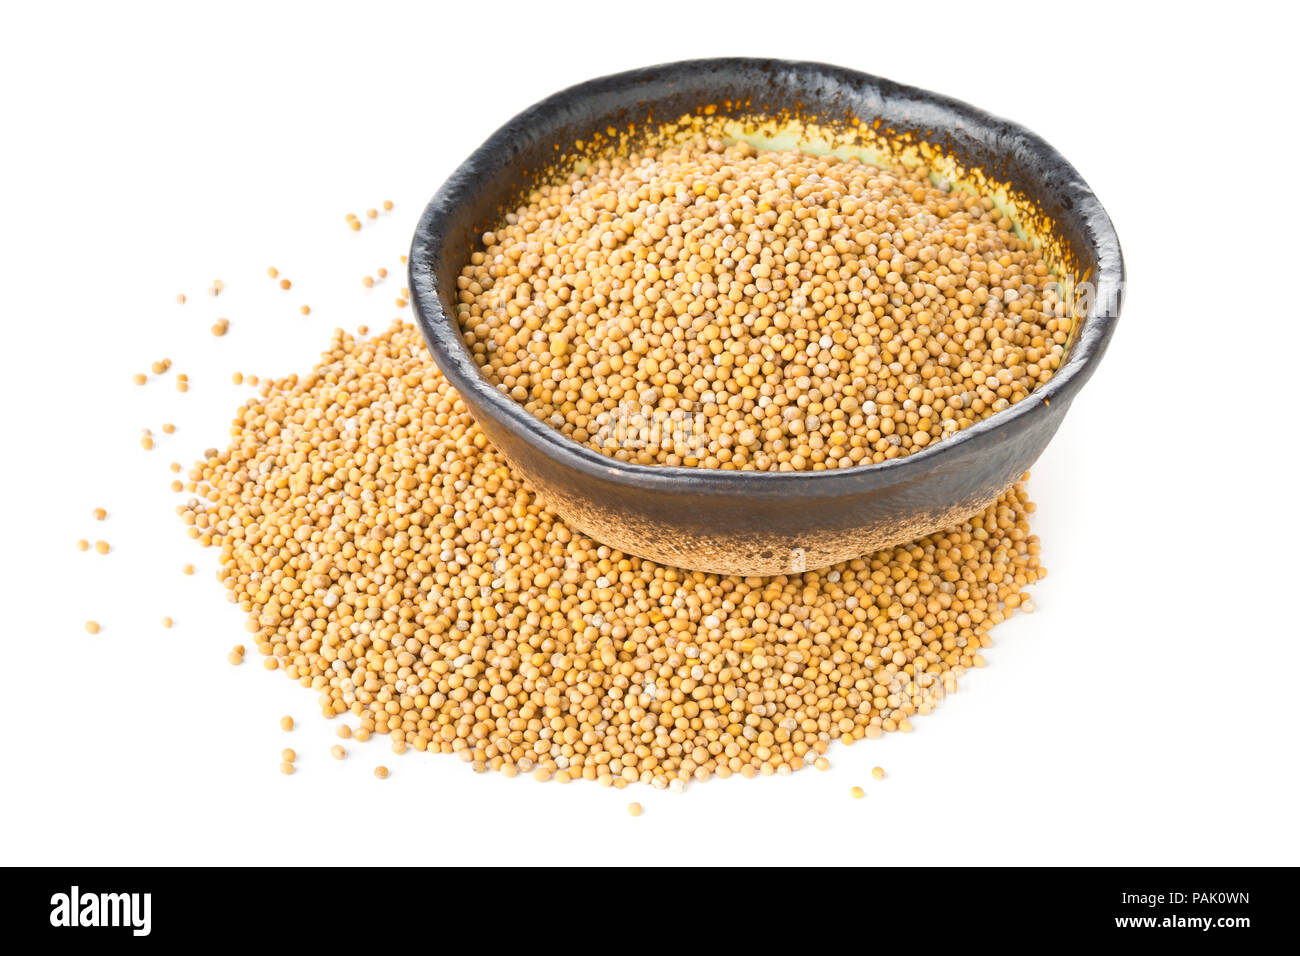 Heap of raw, unprocessed mustard seed kernels in bowl on white background Stock Photo